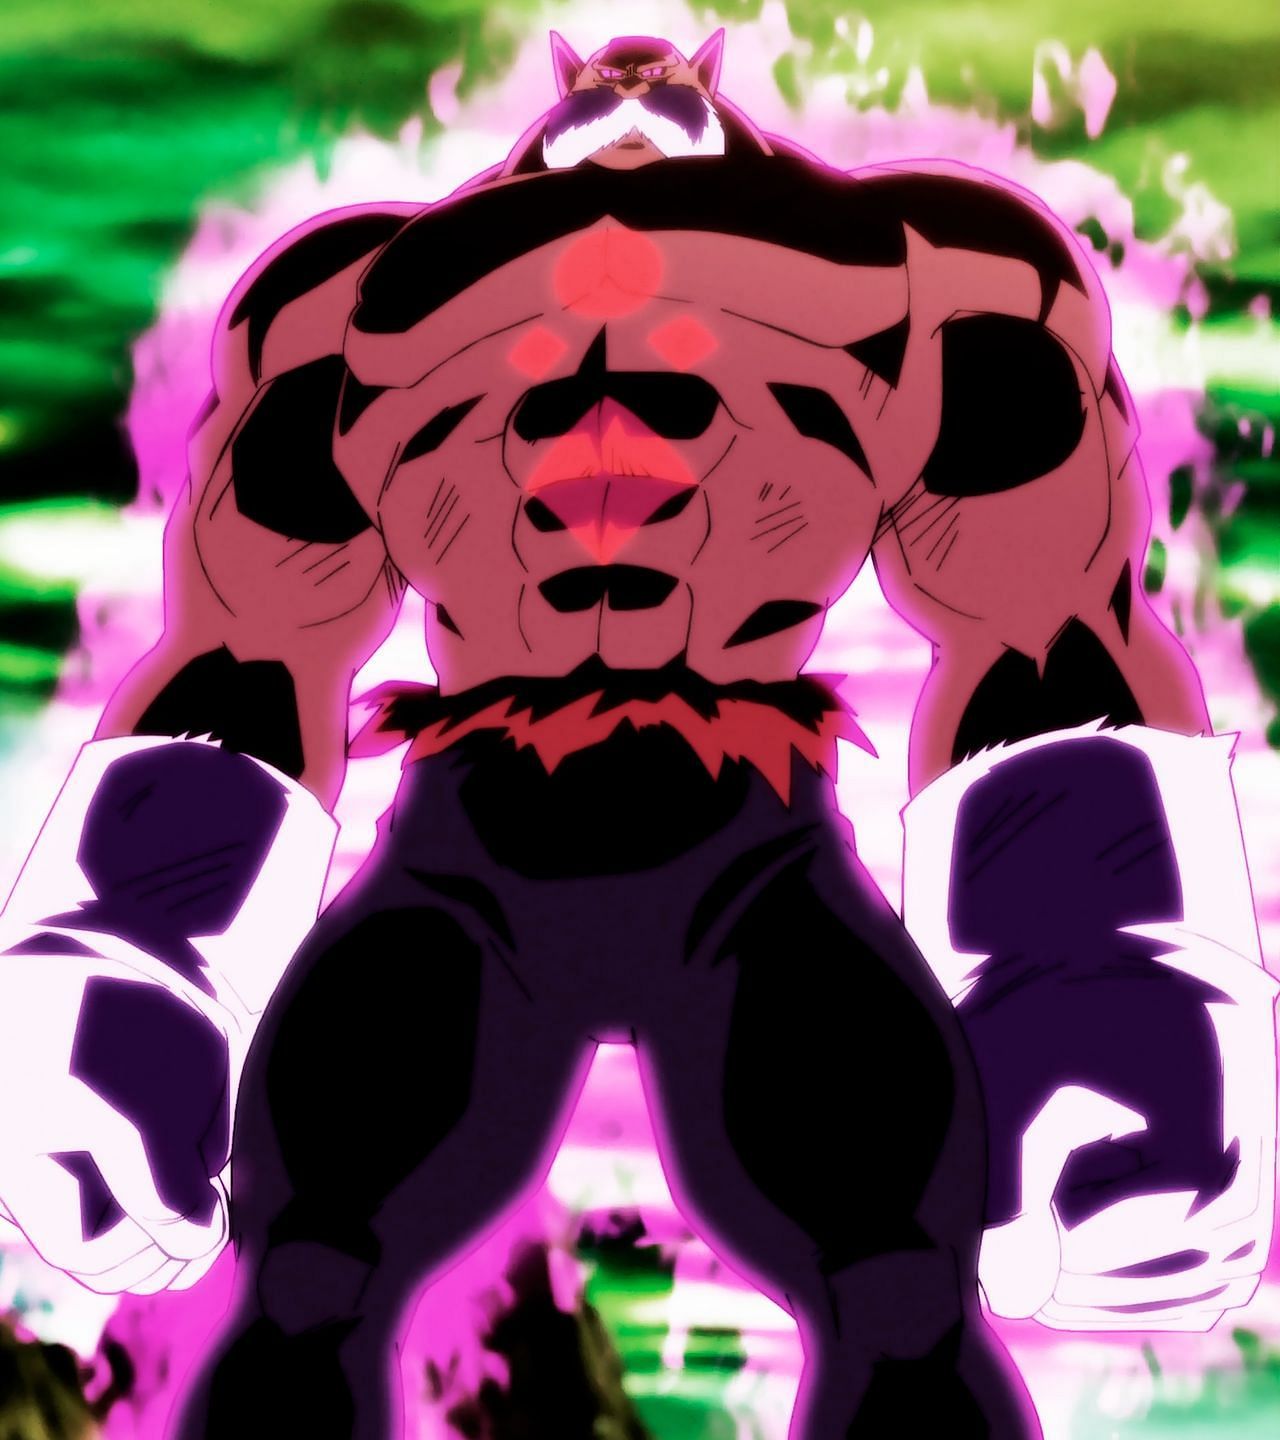 Toppo&#039;s God of Destruction form as seen in the Dragon Ball Super anime. (Image via Toei Animation)